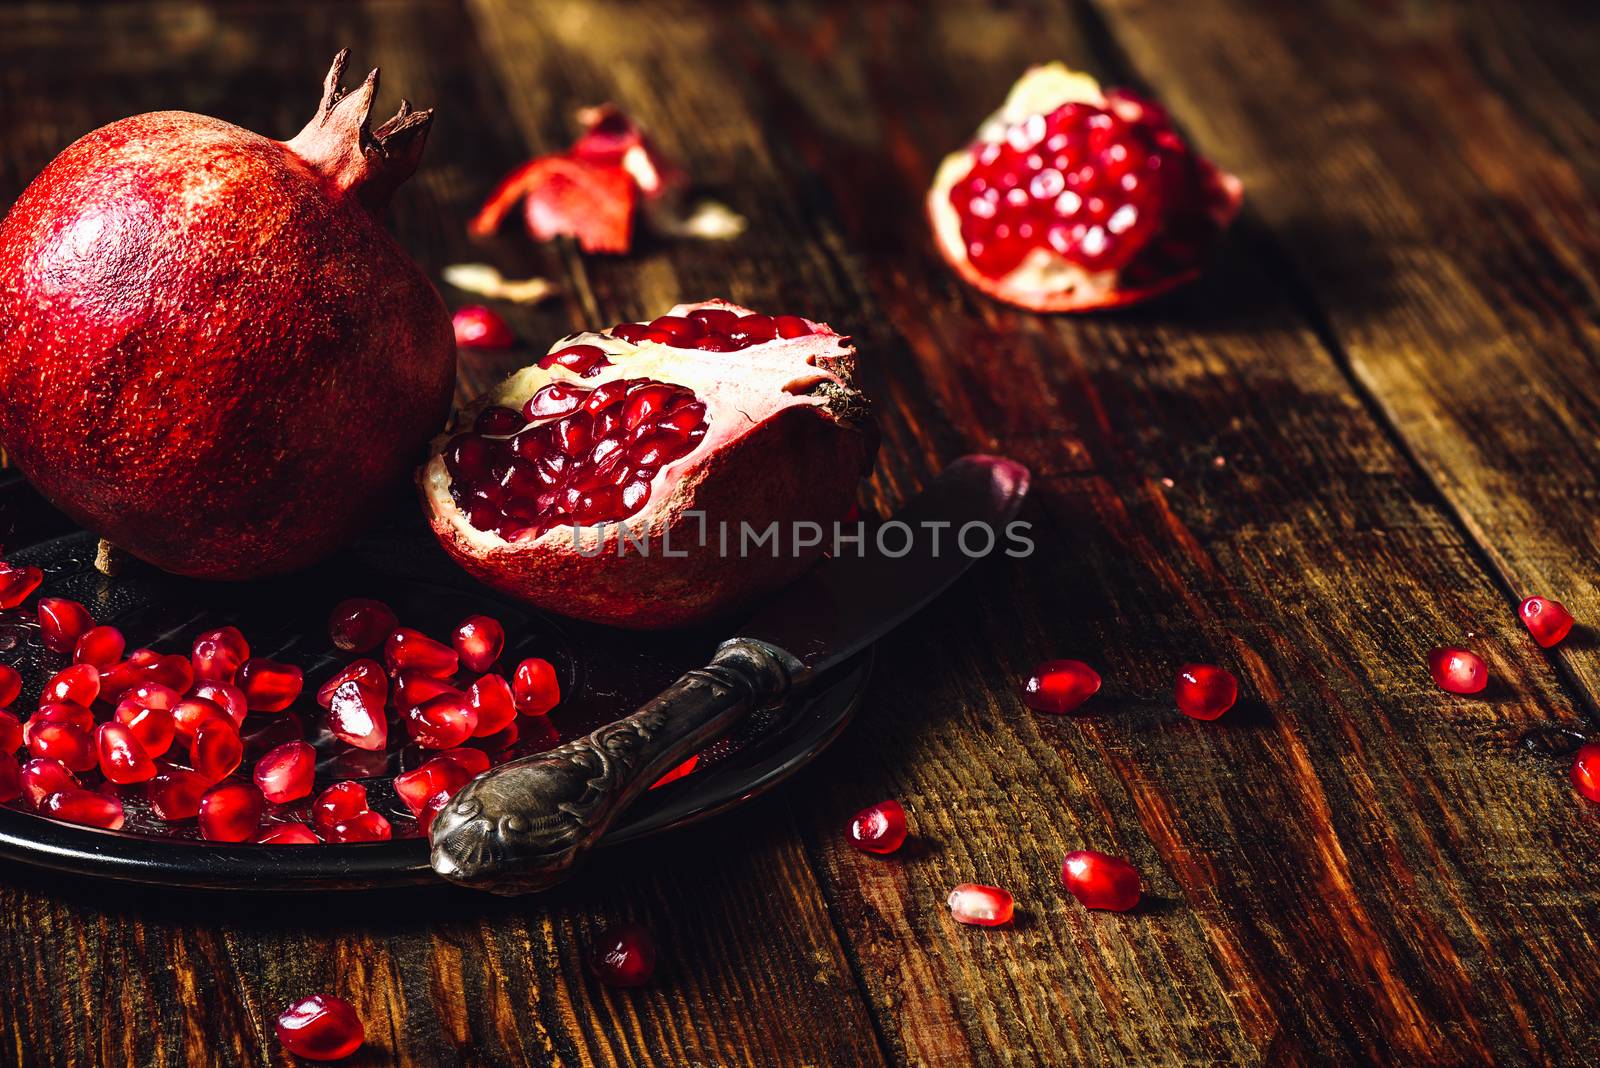 Opened Pomegranate and Whole One wiith Seeds on Metal Plate and Vintage Knife. Some Seeds and Pieces Scattered on Wooden Surface. Copy Space on the Right.